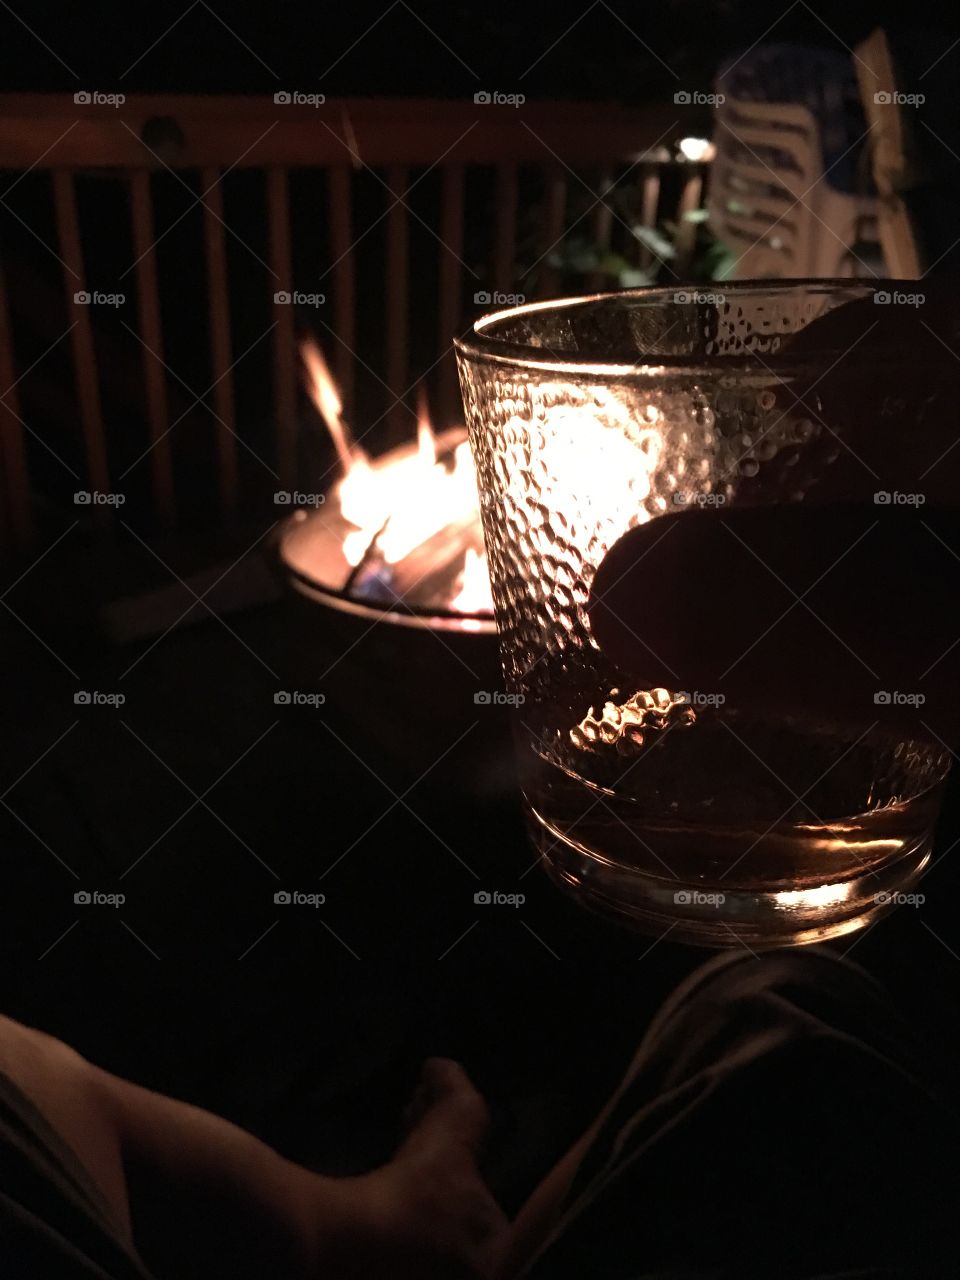 Bourbon and a fire pit